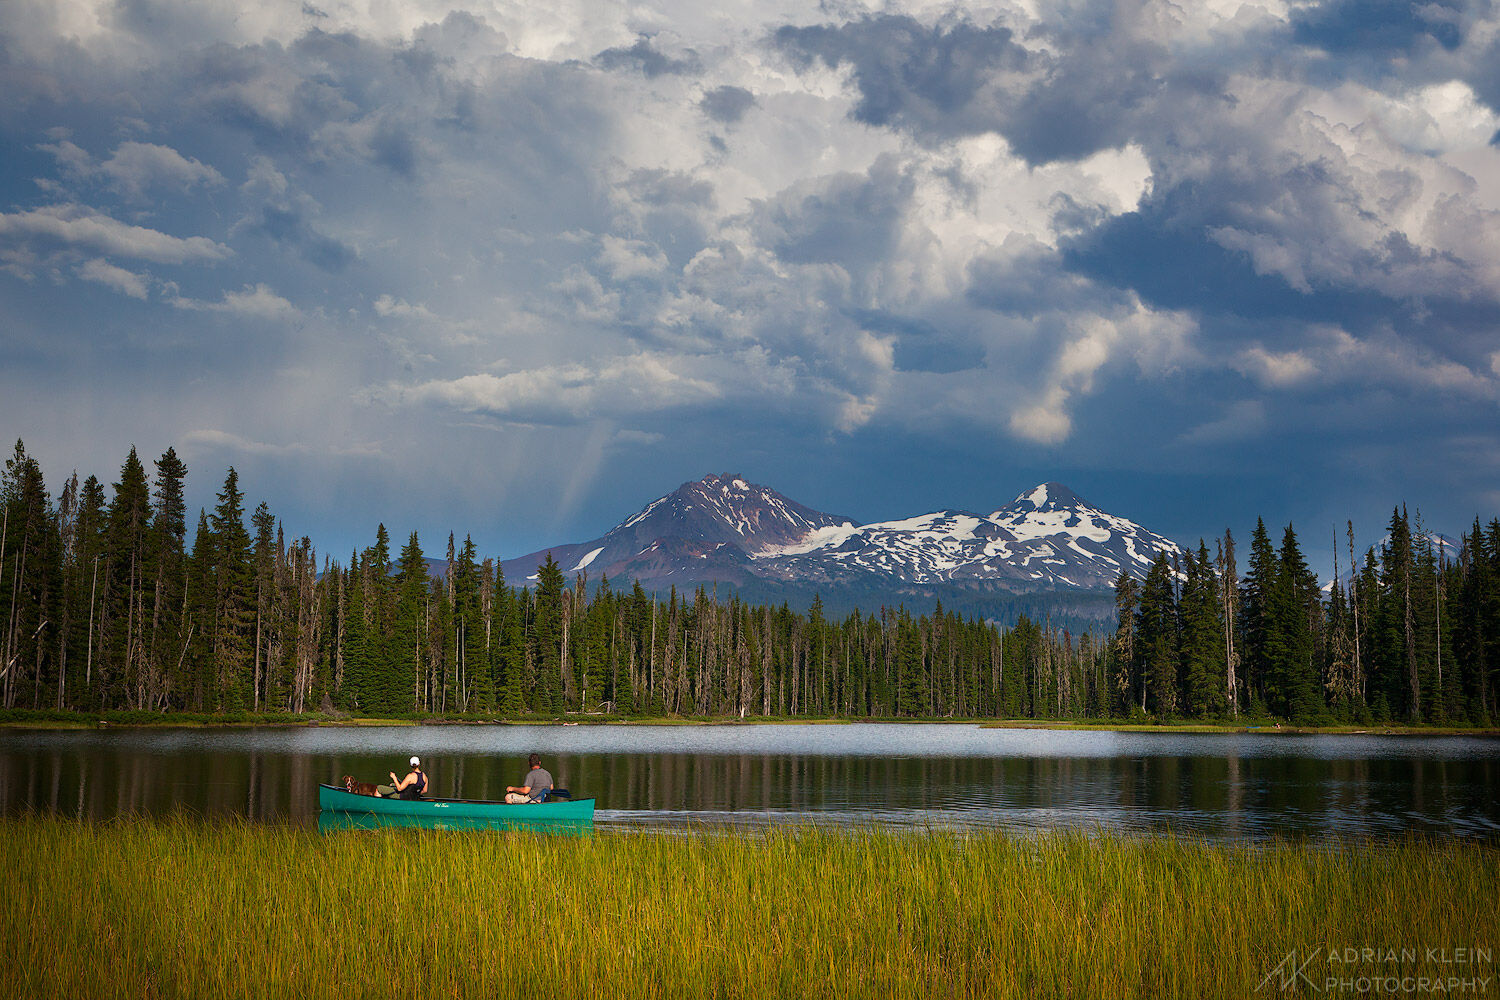 Two people and a dog canoeing on peaceful Scott Lake in Central Oregon as a stormy sky brews above.